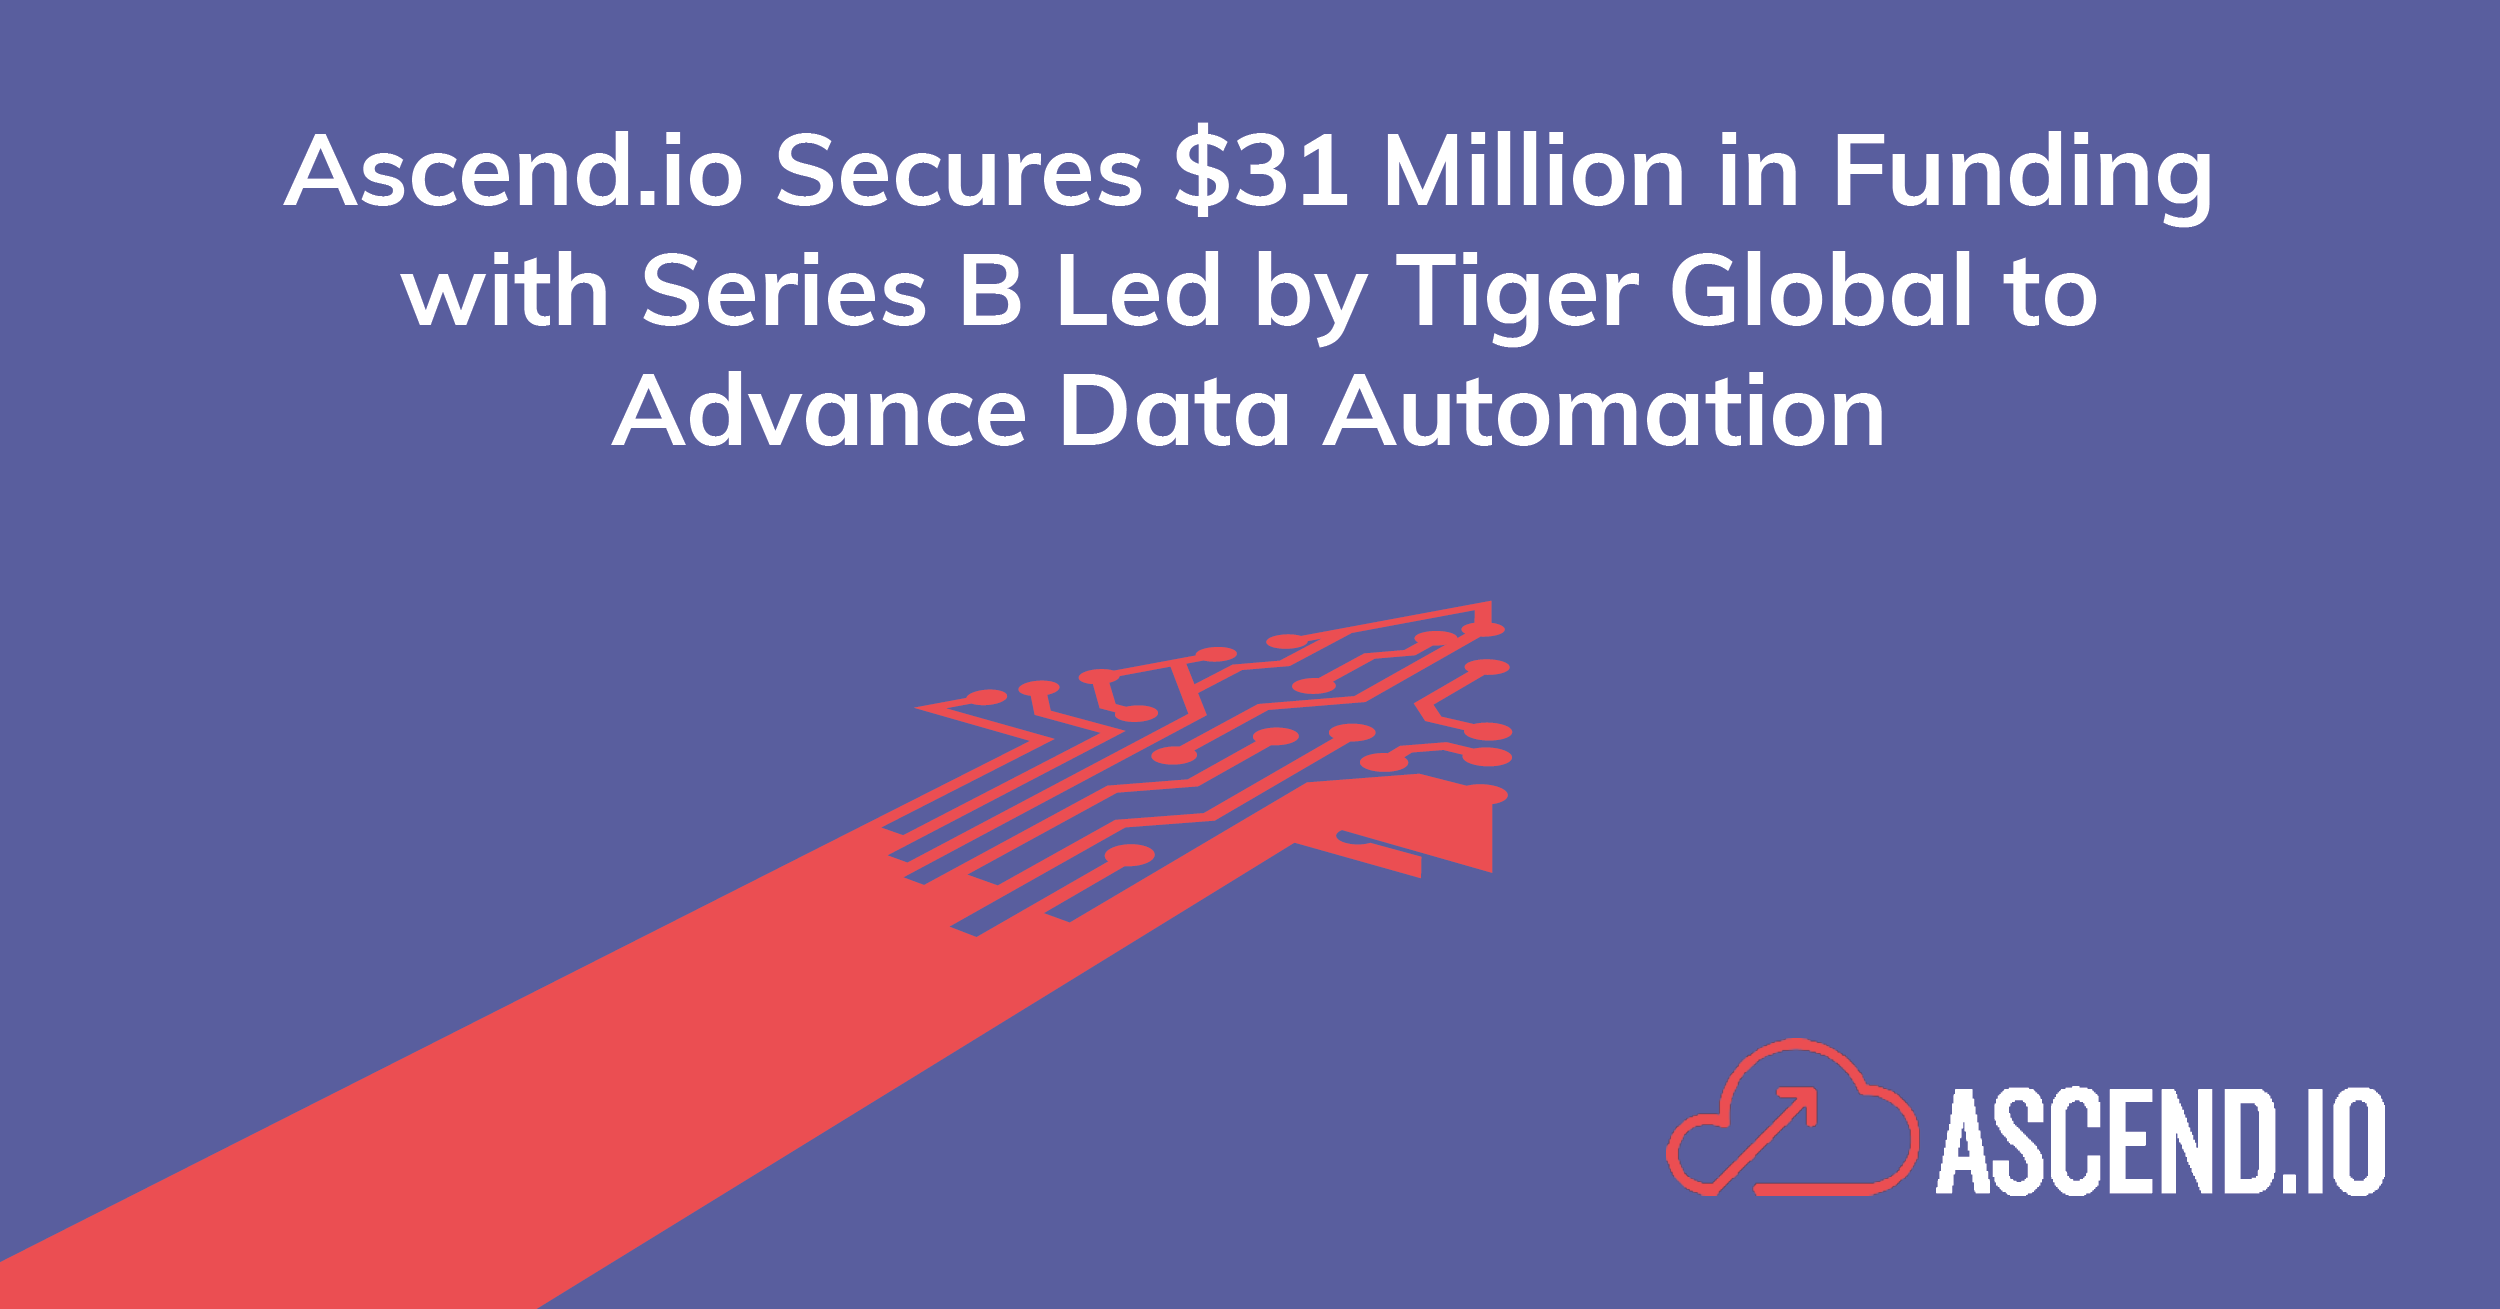 Ascend.io Secures $31 Million in Funding with Series B Led by Tiger Global to Advance Data Automation